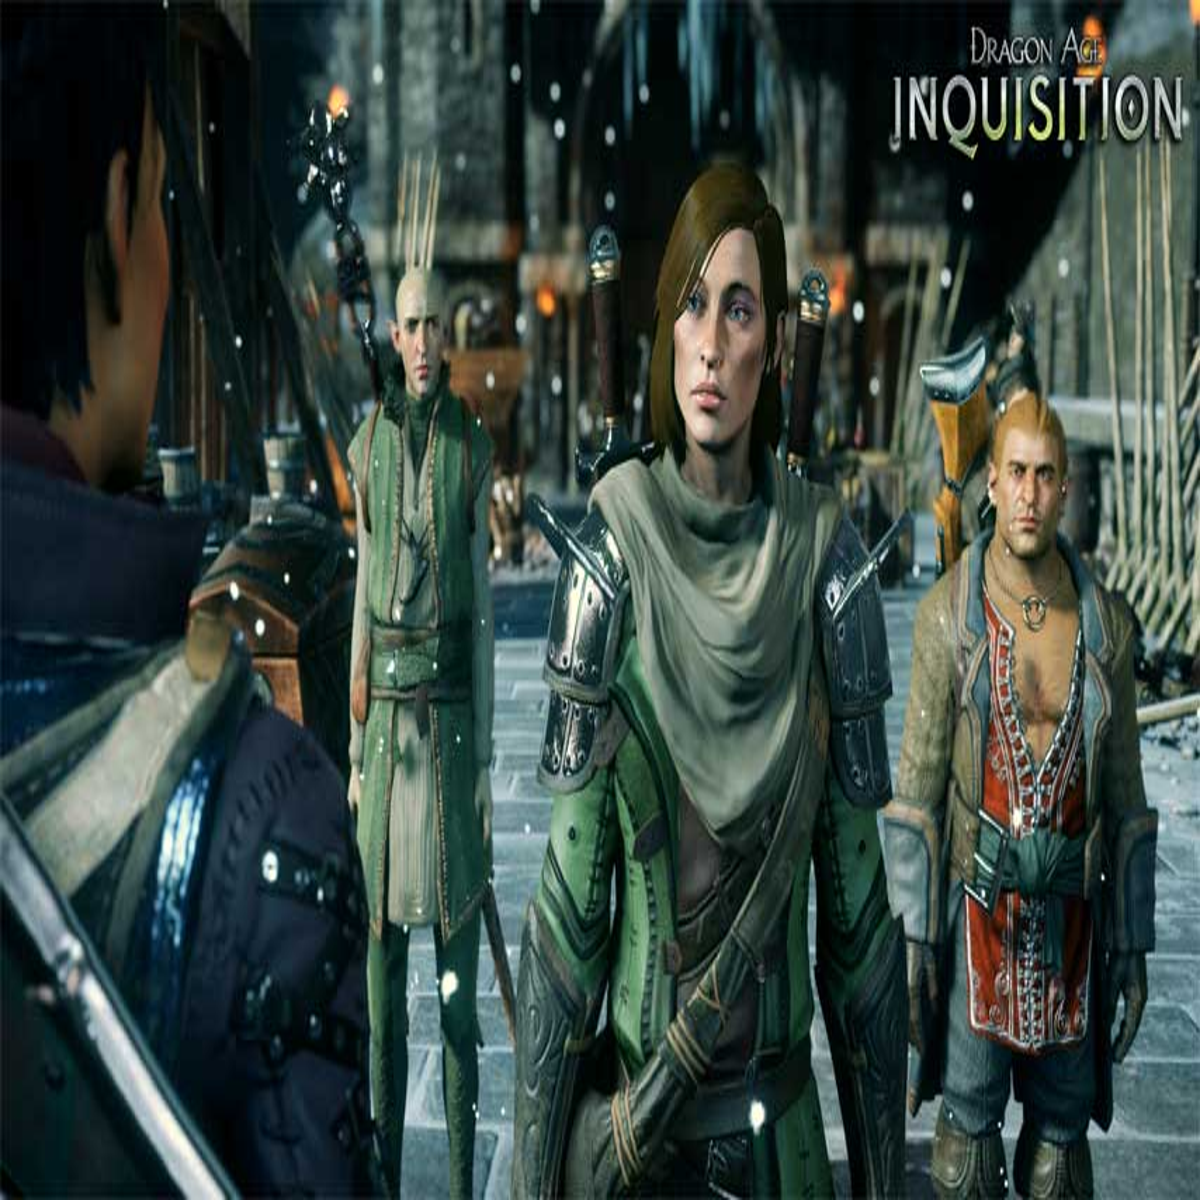 Dragon Age: Inquisition – How To Get Started Playing Your First Game